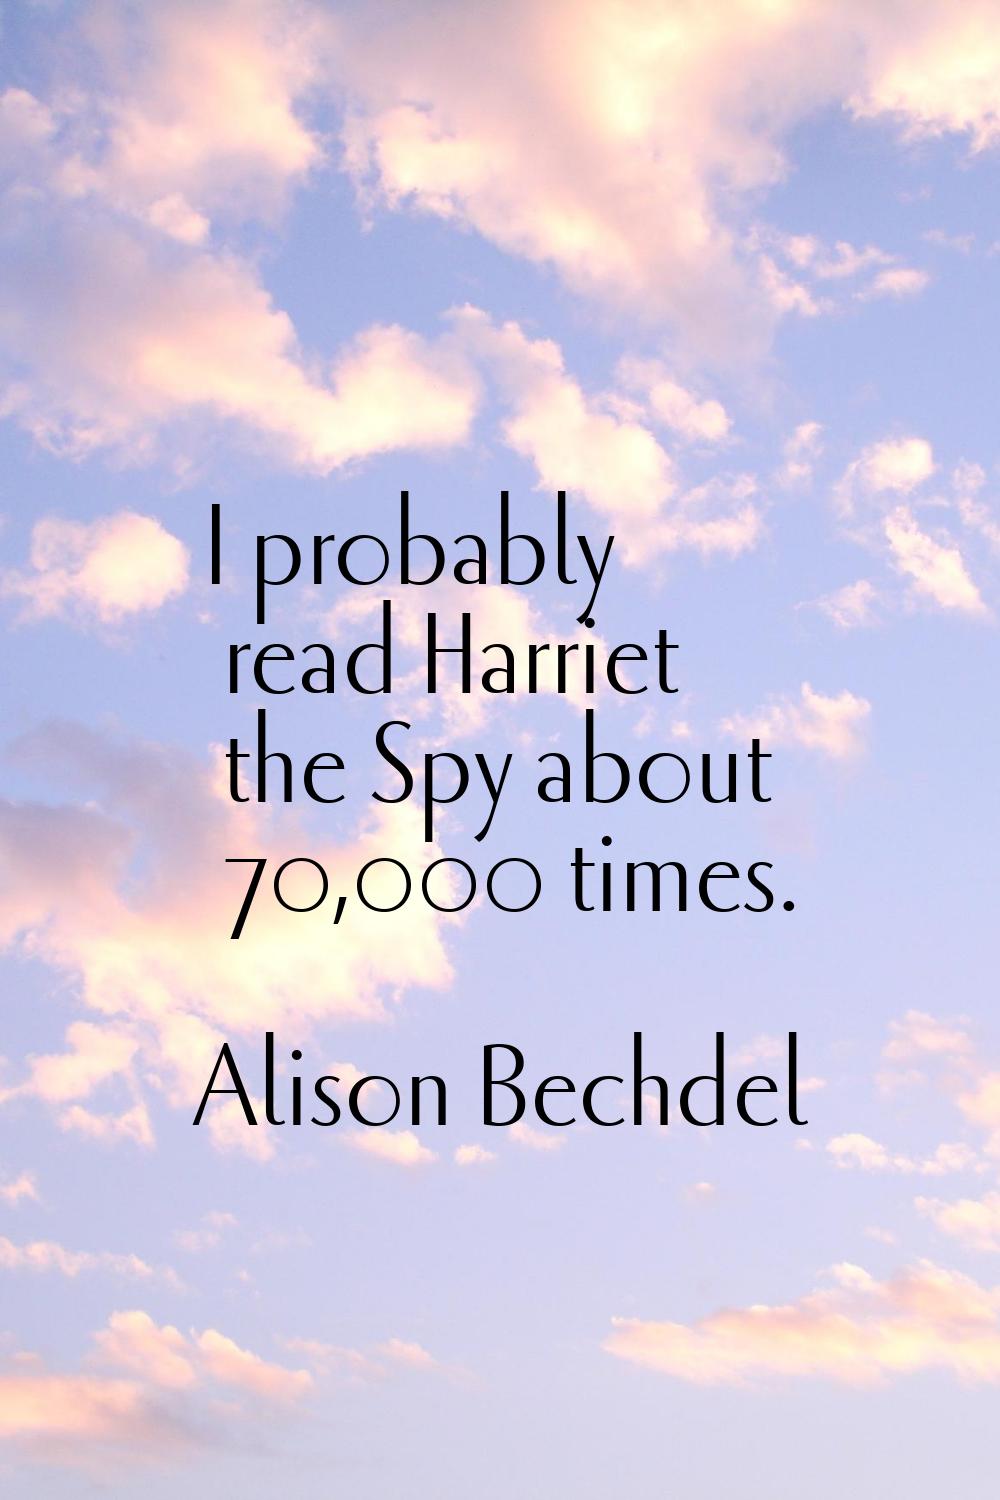 I probably read Harriet the Spy about 70,000 times.